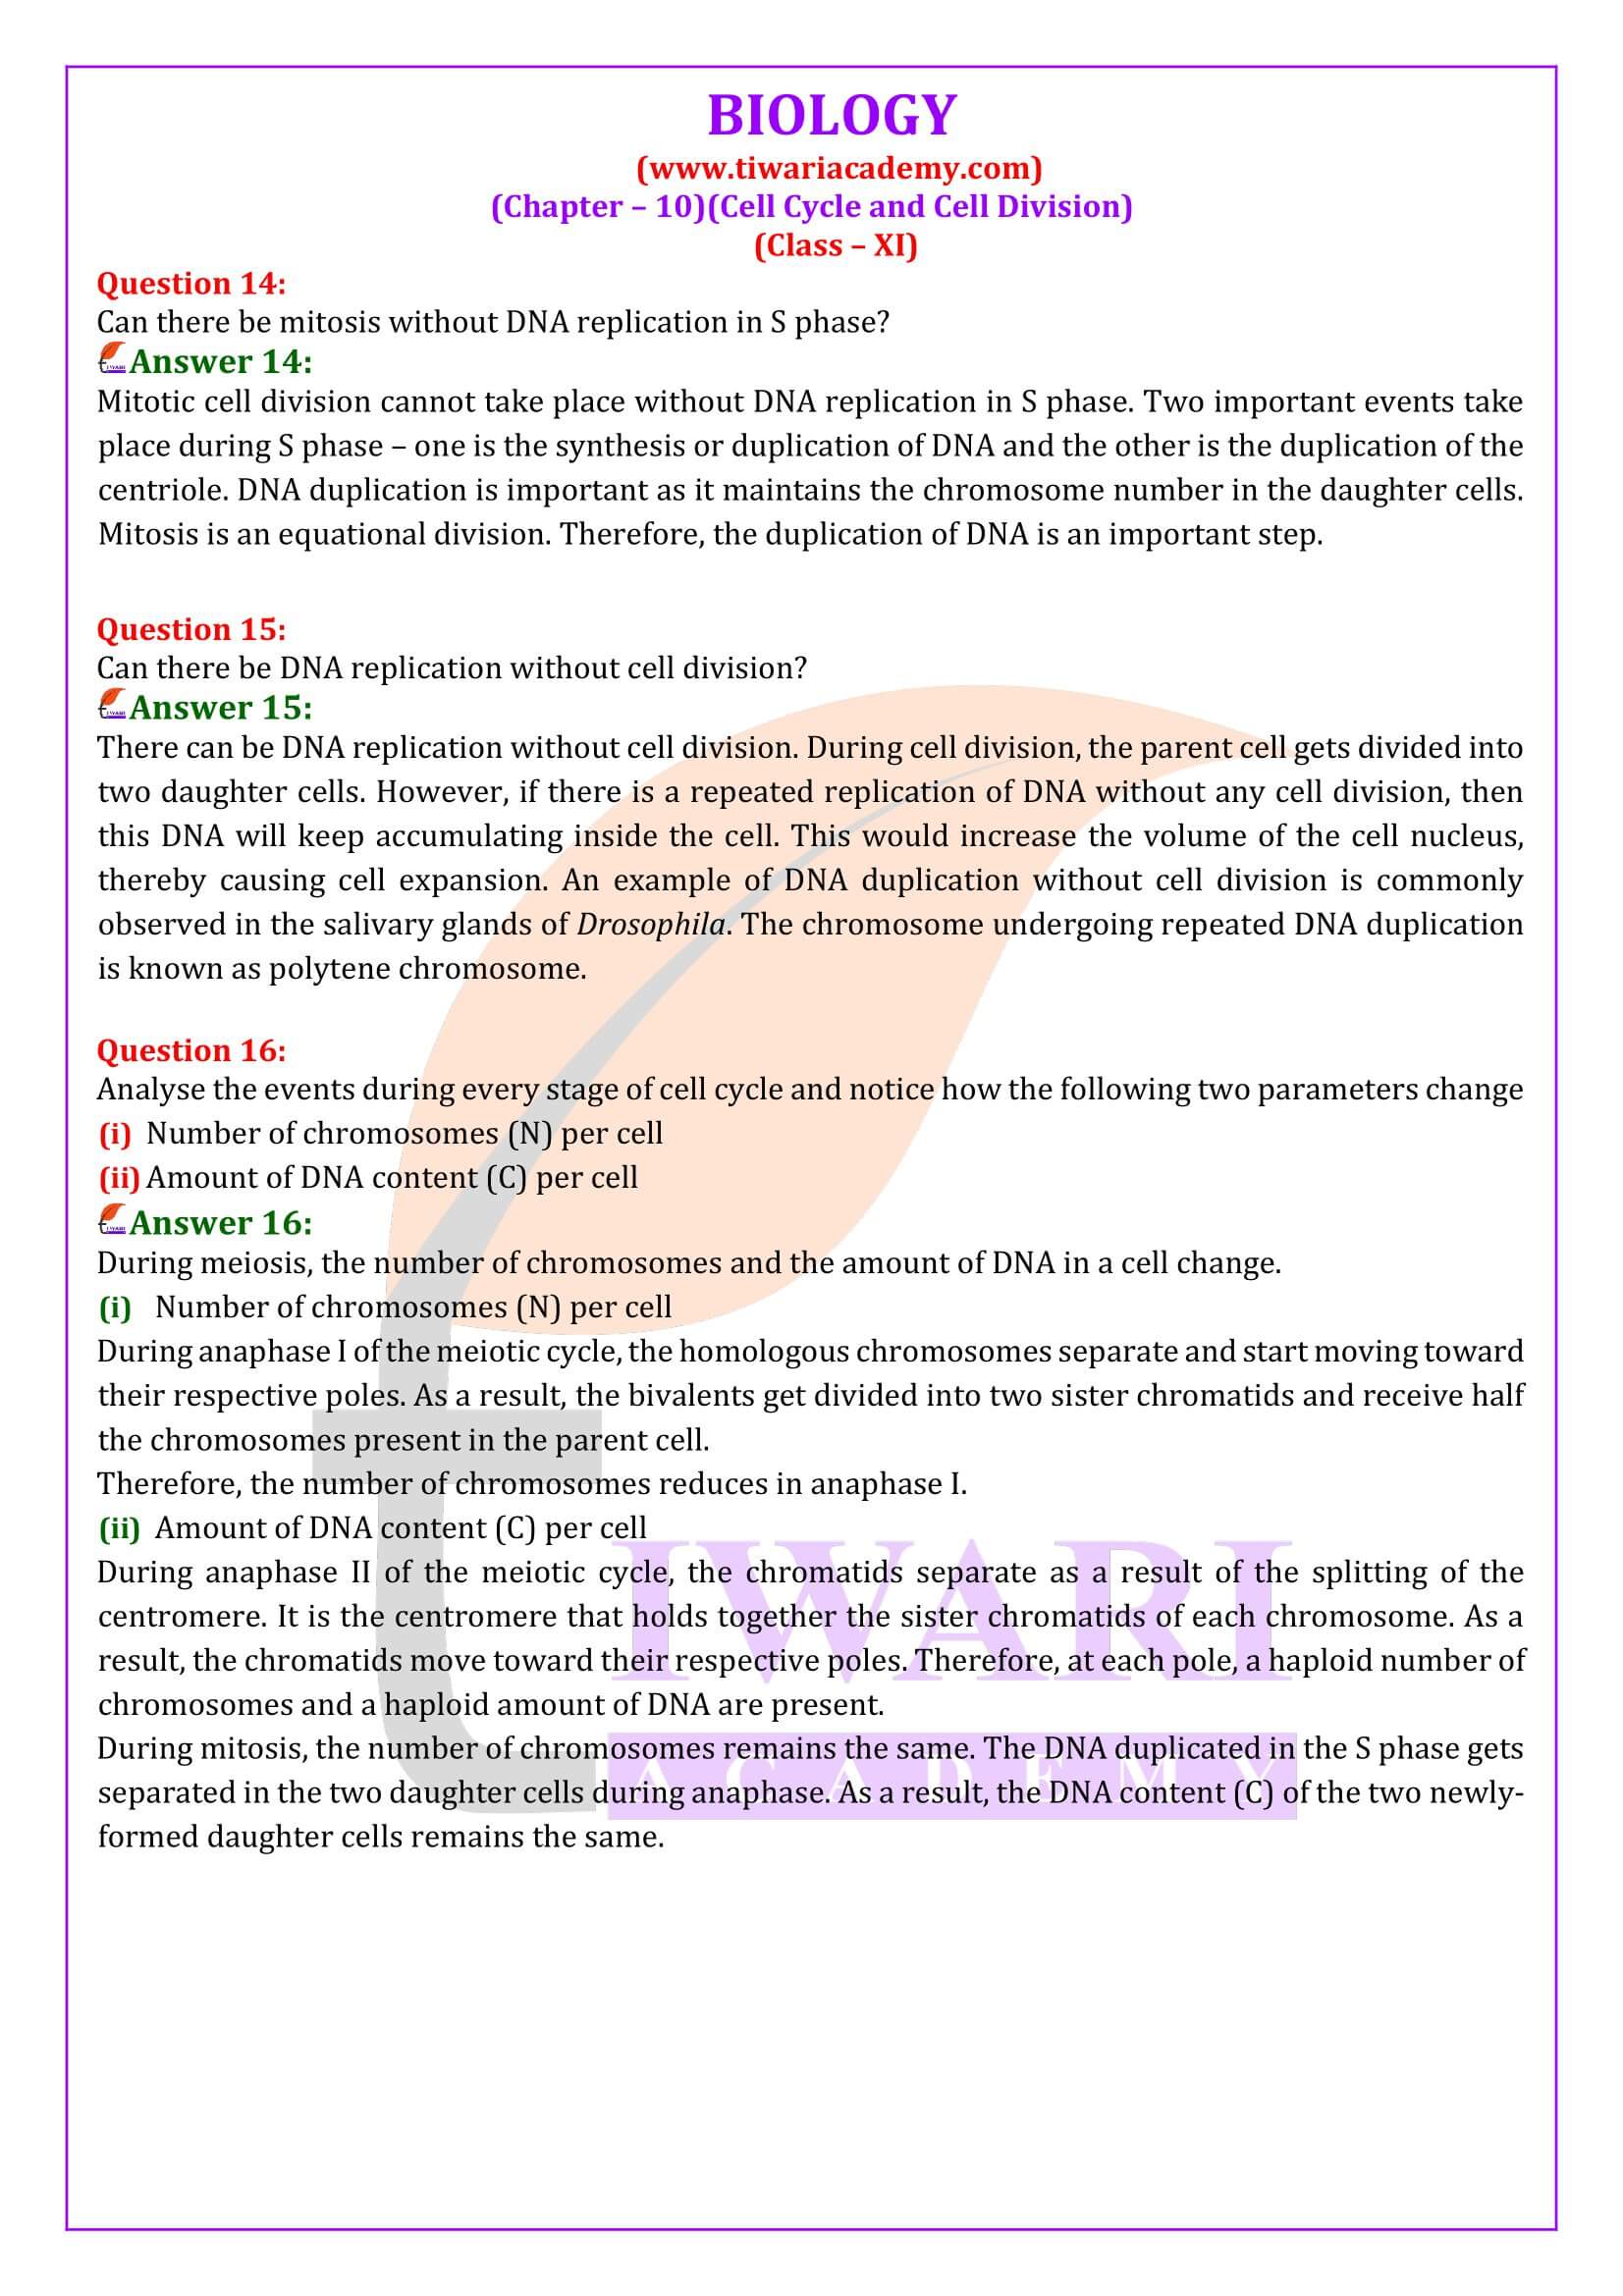 Class 11 Biology Chapter 10 Solutions in English